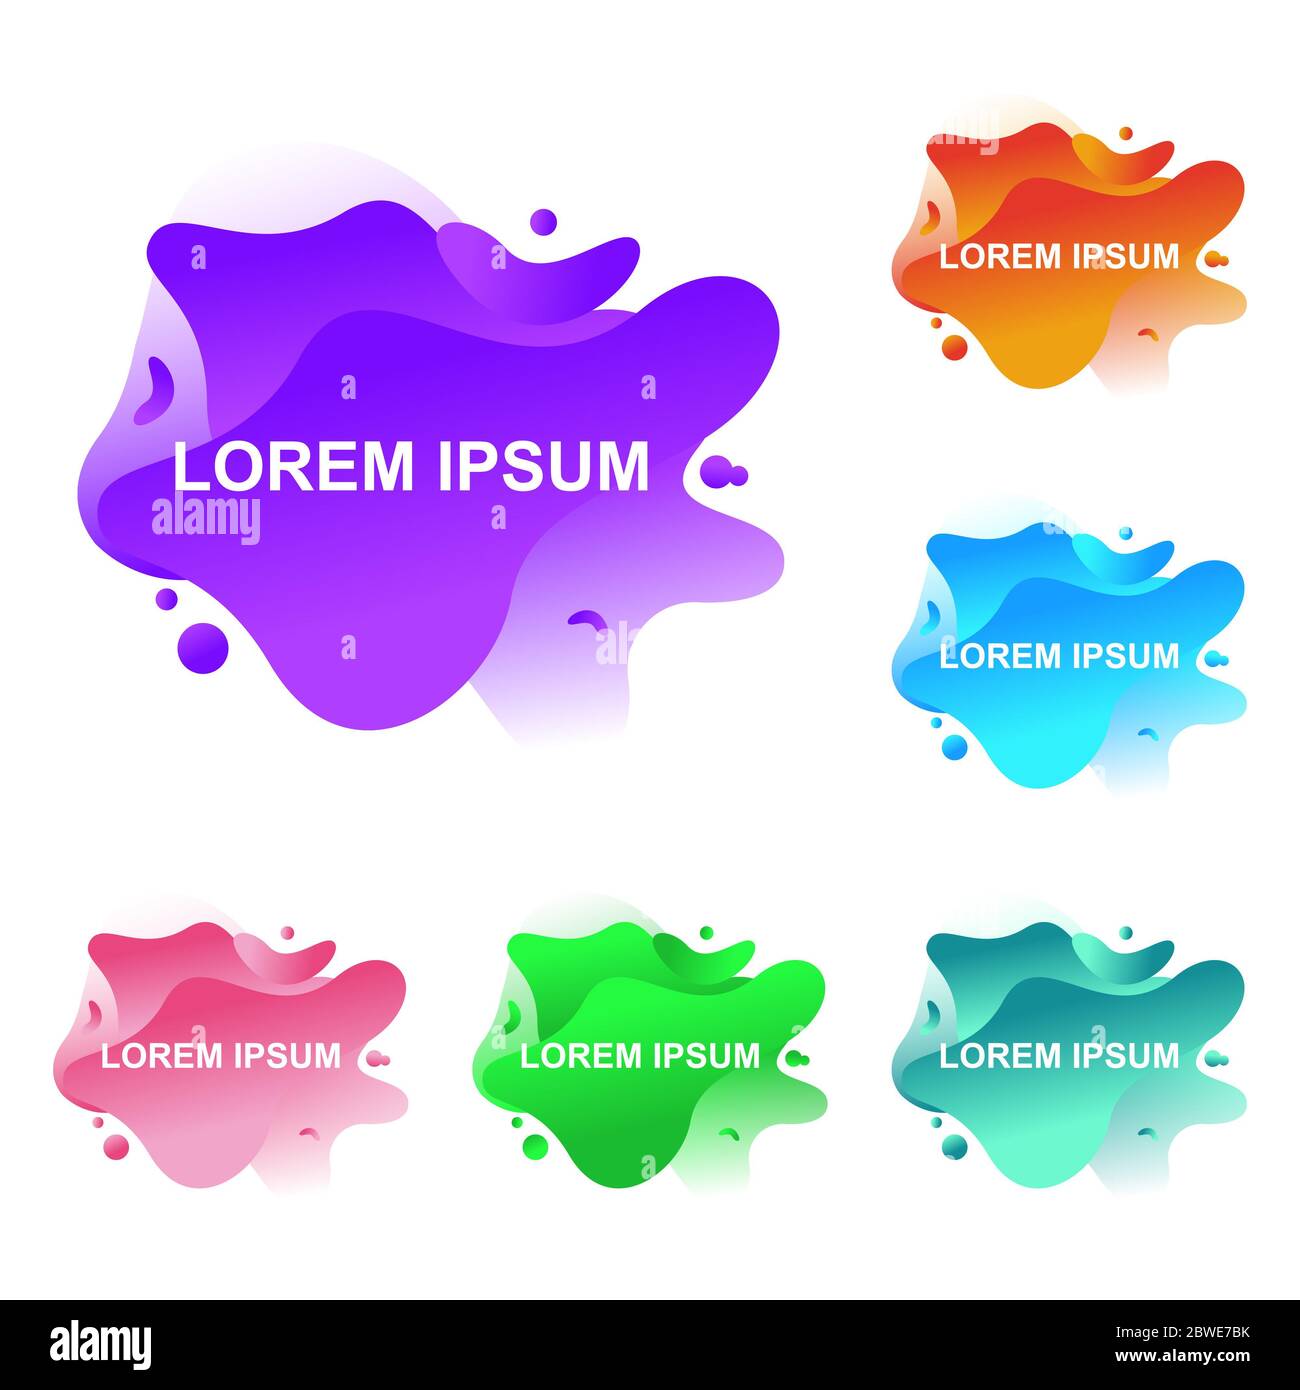 Abstract Modern Dynamical Gradient Colored Liquid Fluid Shape Banner Stock Photo